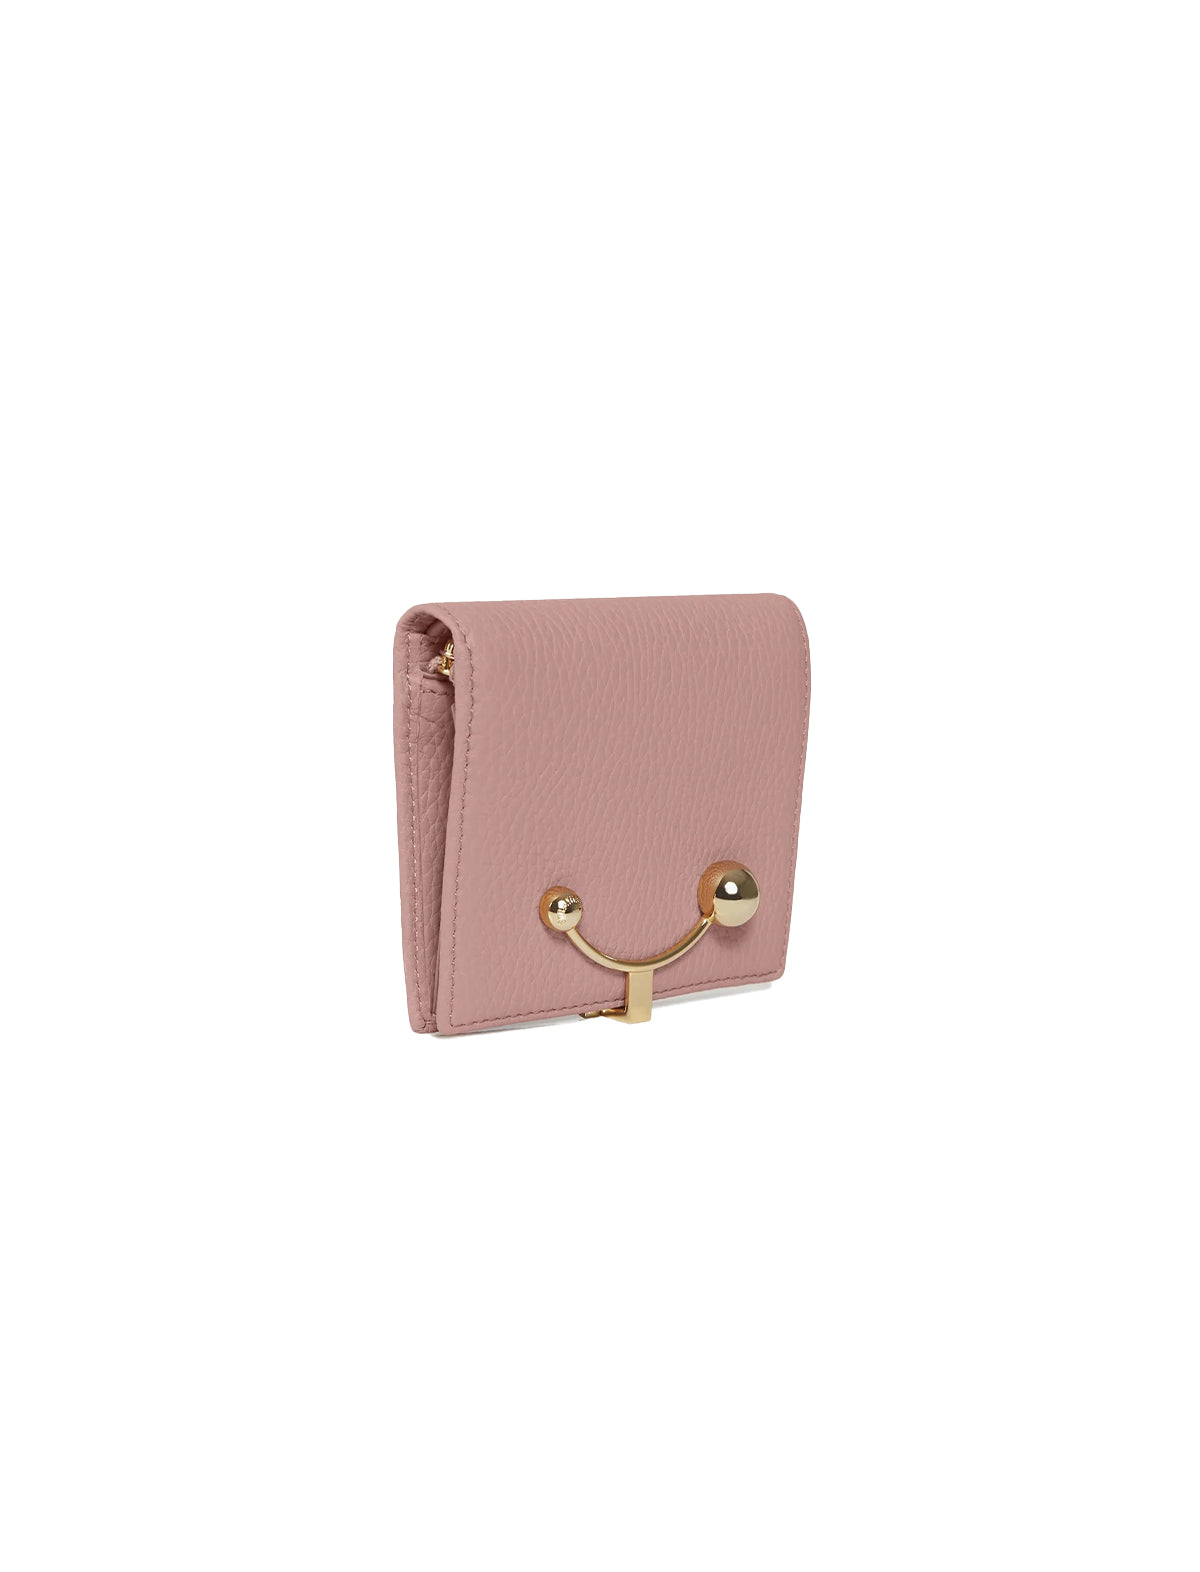 STRATHBERRY Crescent Wallet in Grain Leather Blush Rose